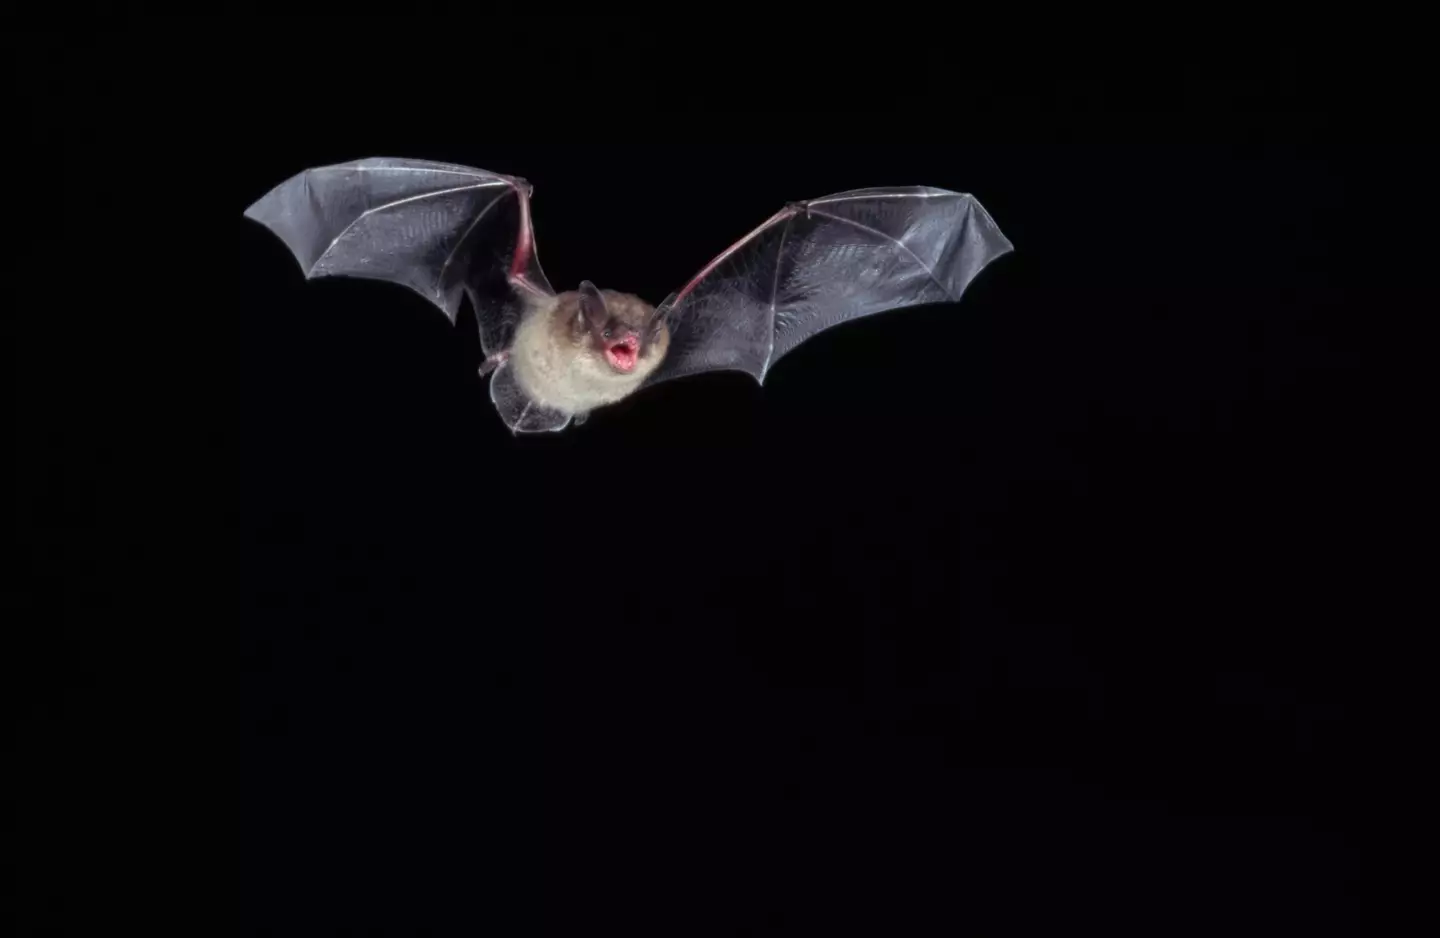 Guests had a less than pleasant evening during their stay due to a run-in with multiple bats.